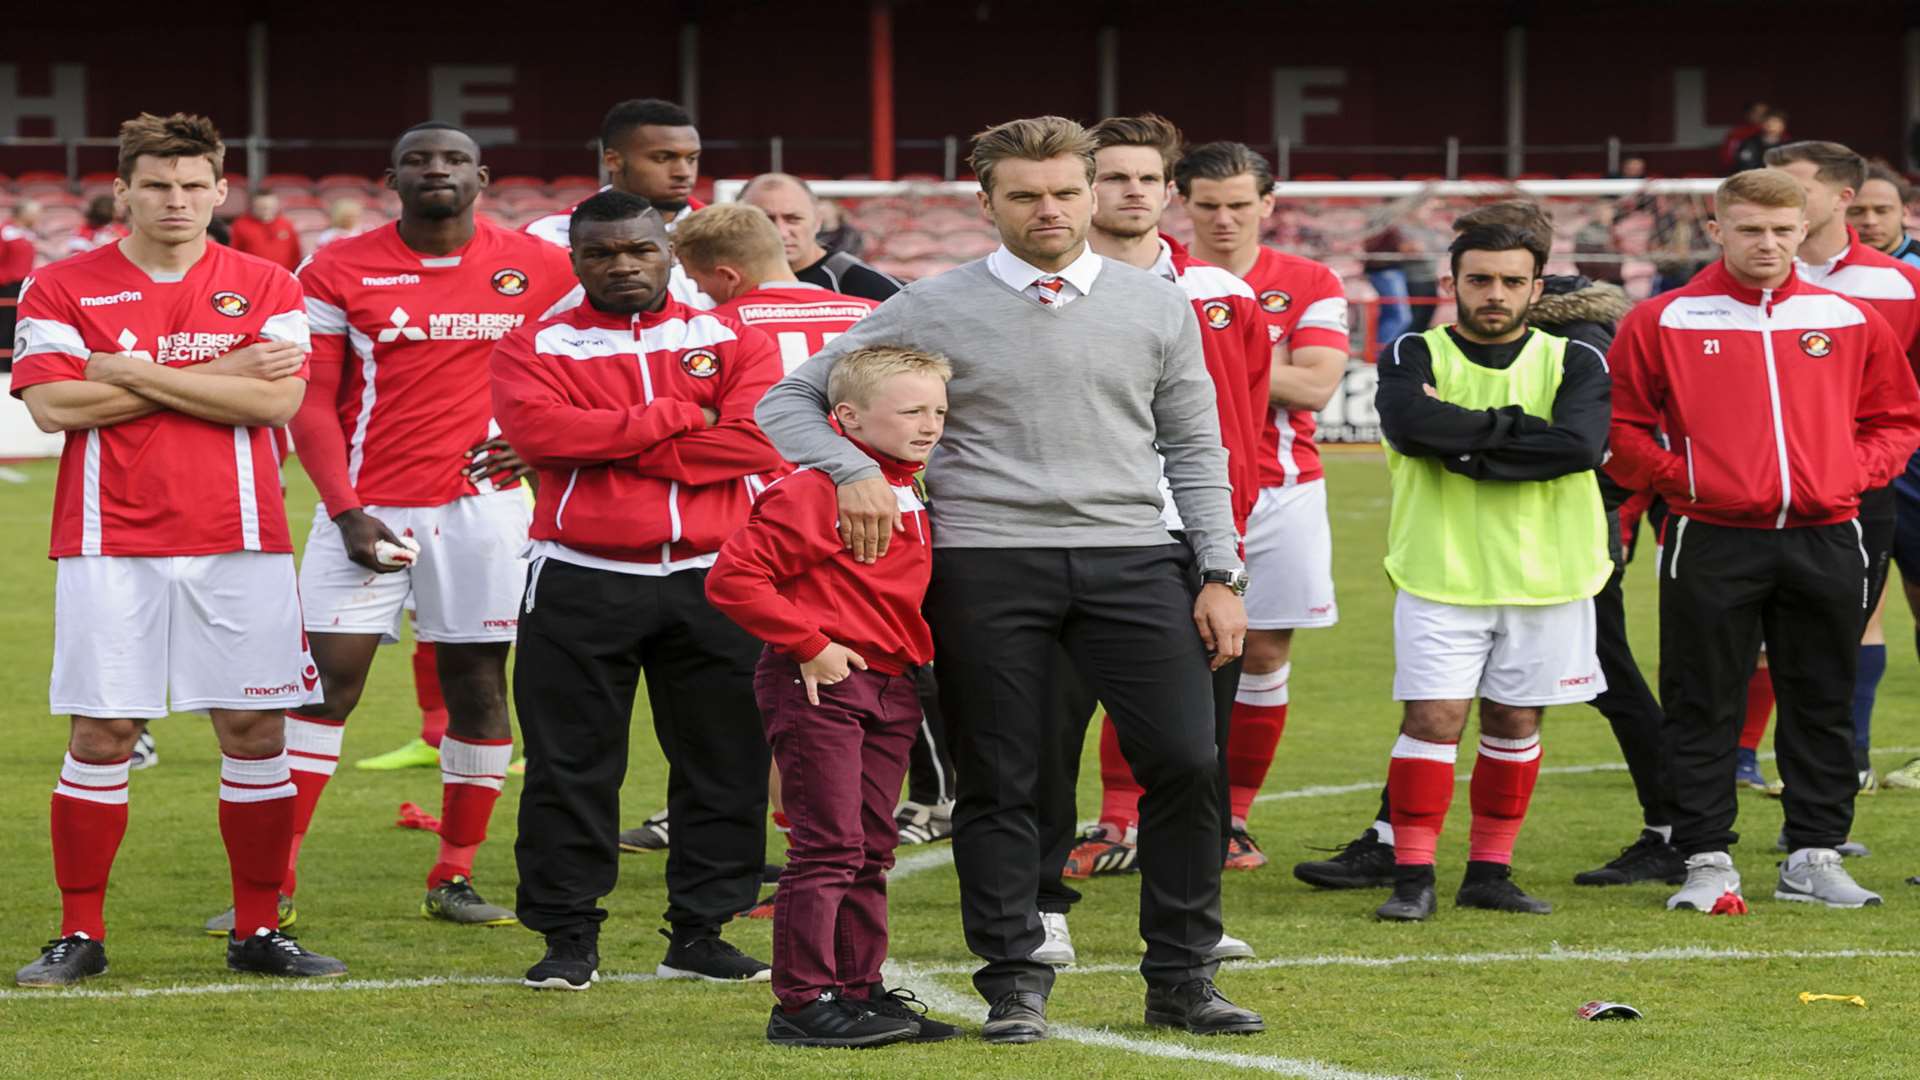 Dejected Ebbsfleet players watch Maidstone collect their medals Picture: Andy Payton